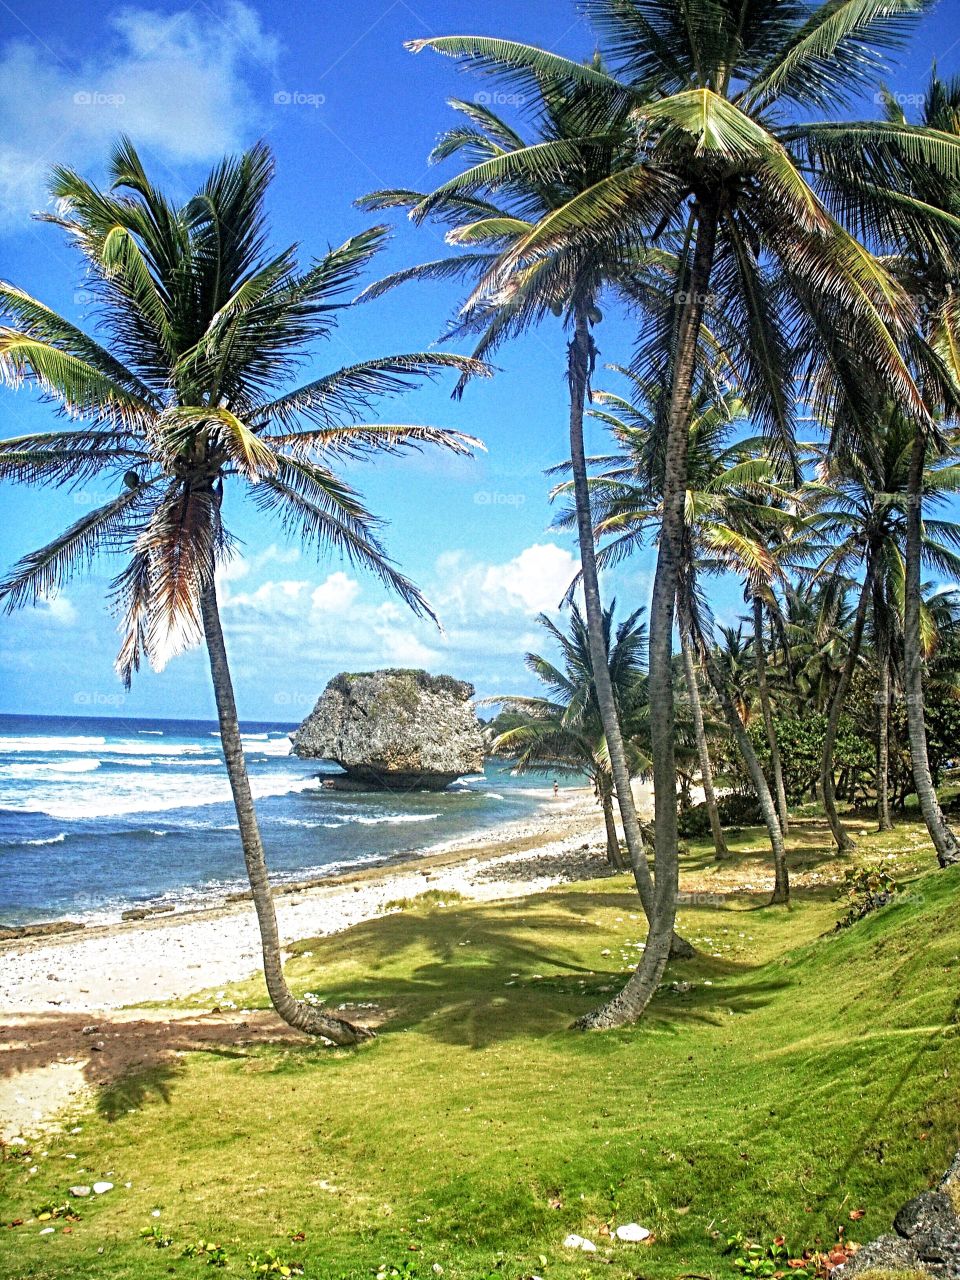 Bathsheba, on the rugged East Coast of Barbados.
Breathtakingly beautiful wide white sandy beaches stretch along a coastline of dramatic rock formations.